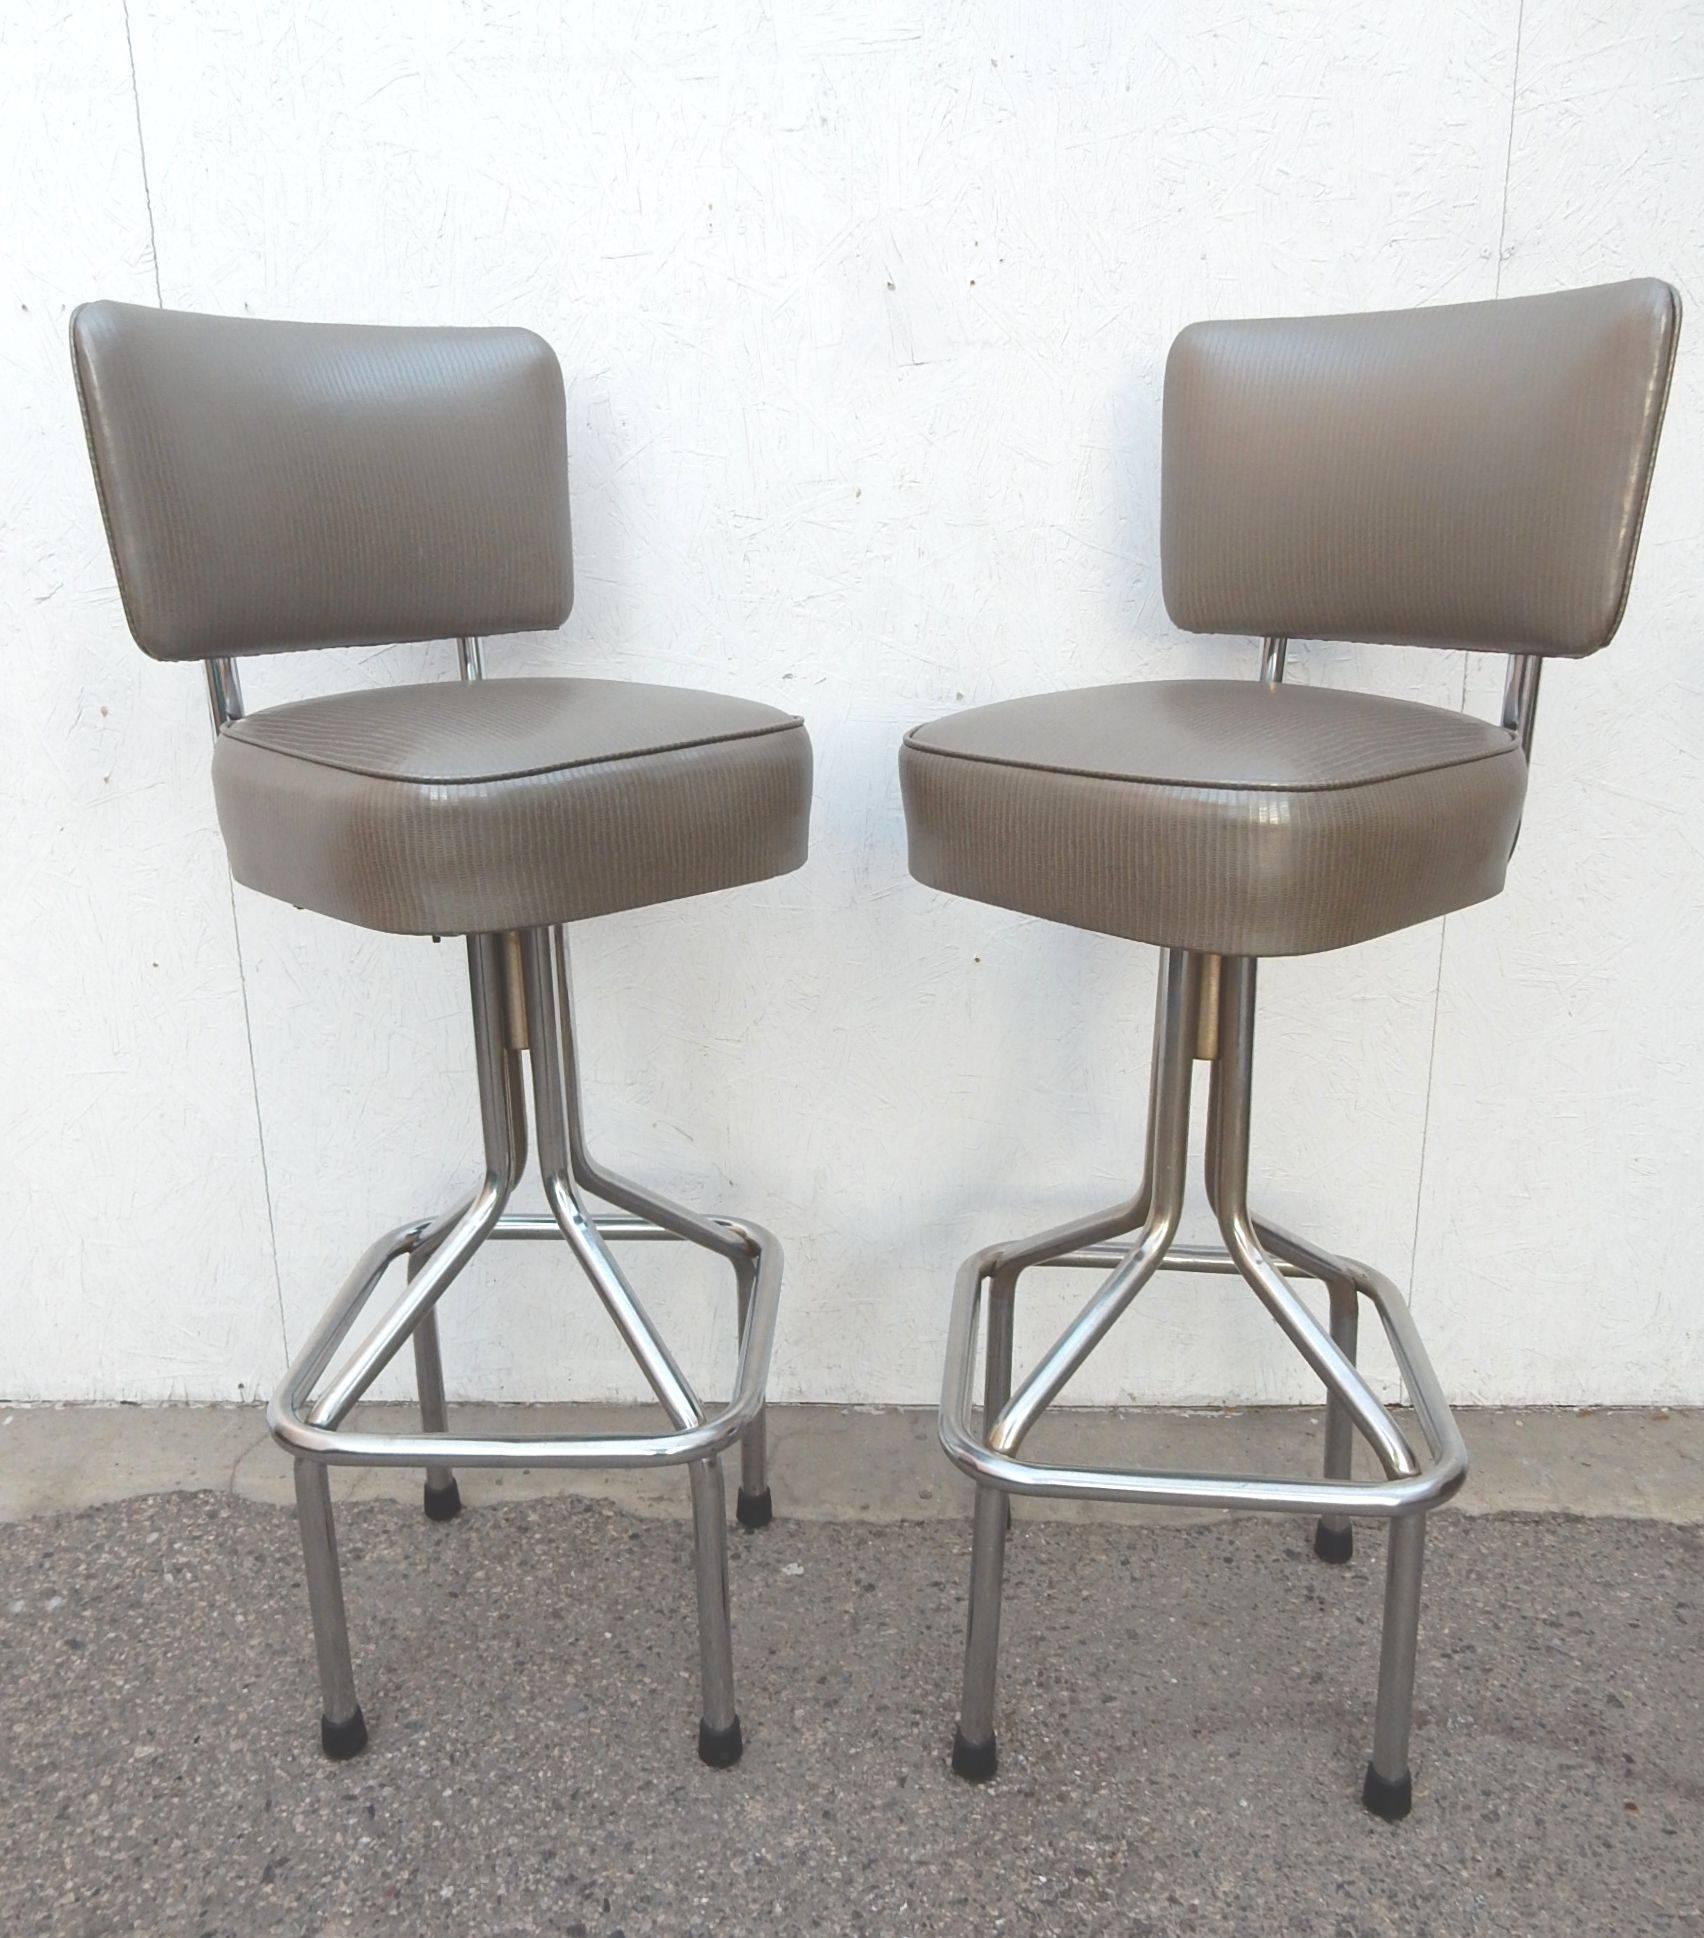 Classic set of quality bars stools from the 1950's. Made of think chrome plated steel tubes with needle bearing swivel mechanism. Freshly upholstered in a luxurious platinum faux snakeskin vinyl. Made in Los Angeles. 
Set of 4, all in excellent